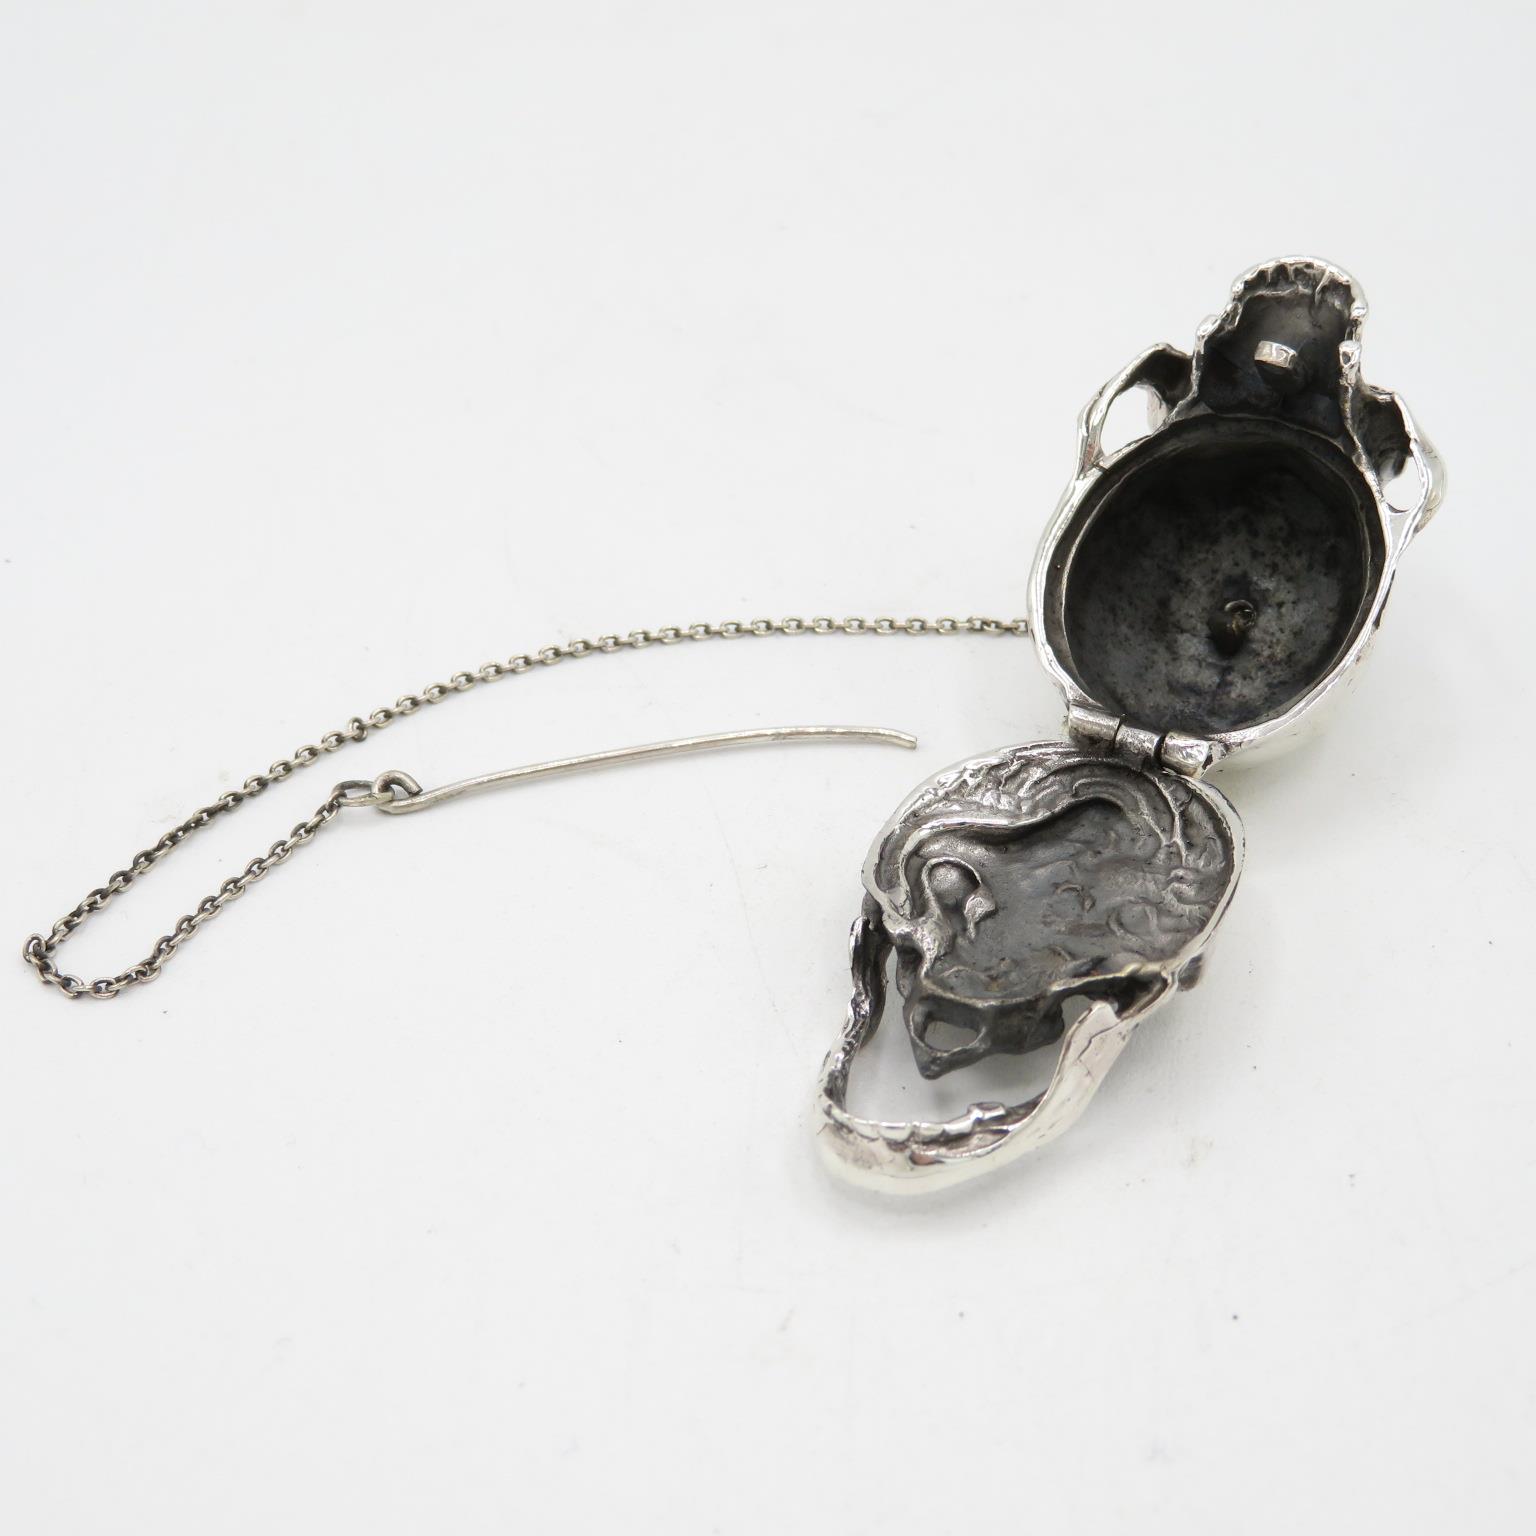 Extremely fine detailed articulated Memento Mori human skull in sterling silver with hinged bottom - Image 4 of 6